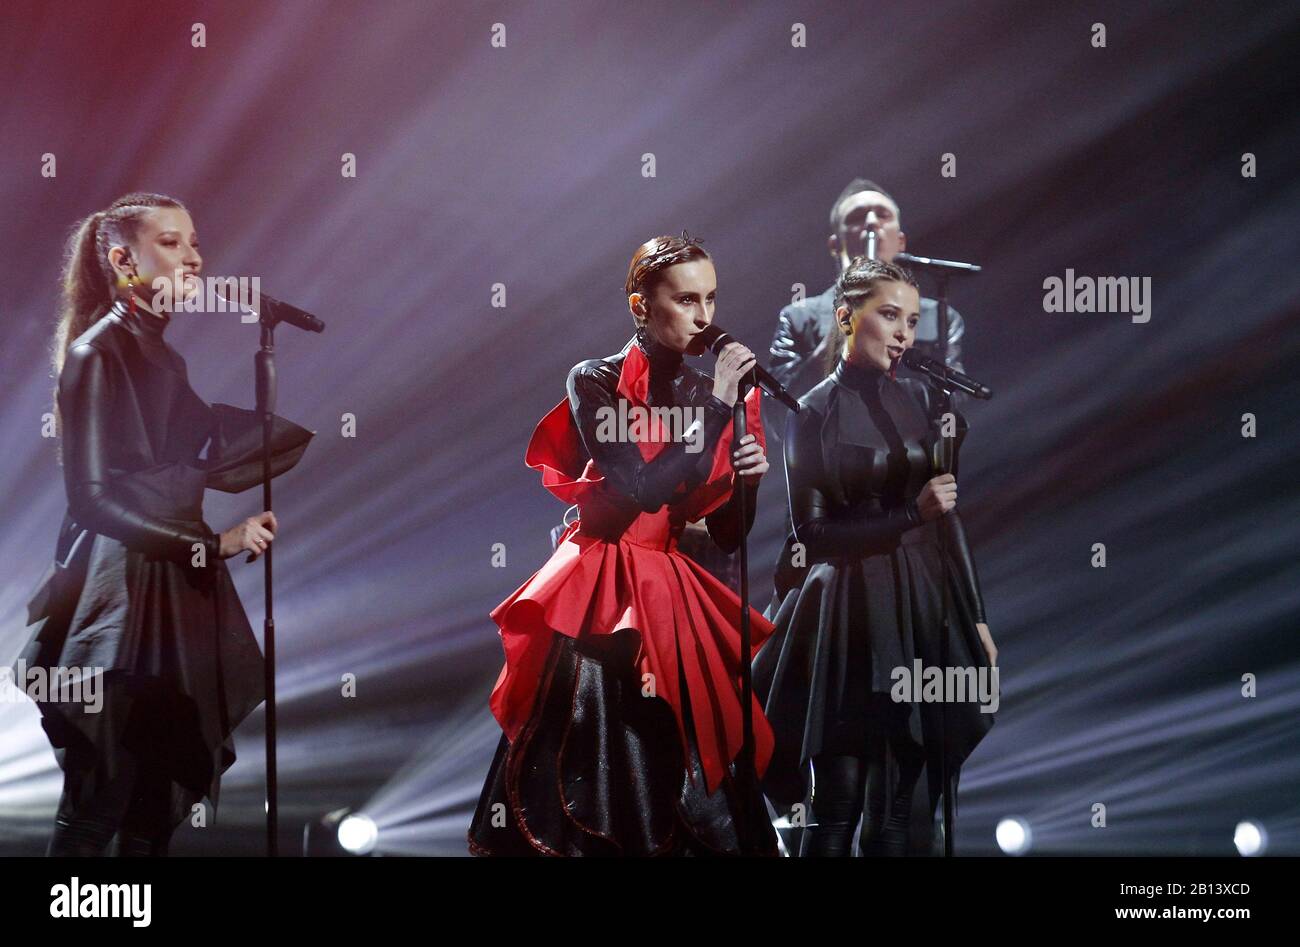 Kiev, Ukraine. 22nd Feb, 2020. Ukrainian band 'Go A' performs during the Eurovision Song Contest (ESC) 2020 national selection final in Kiev, Ukraine, on 22 February 2020. Ukrainian band Go A with 'Solovey' song will represents Ukraine during the 2020 the Eurovision Song Contest contest in Rotterdam, Netherlands, from 12 to 16 May 2020. Credit: Serg Glovny/ZUMA Wire/Alamy Live News Stock Photo